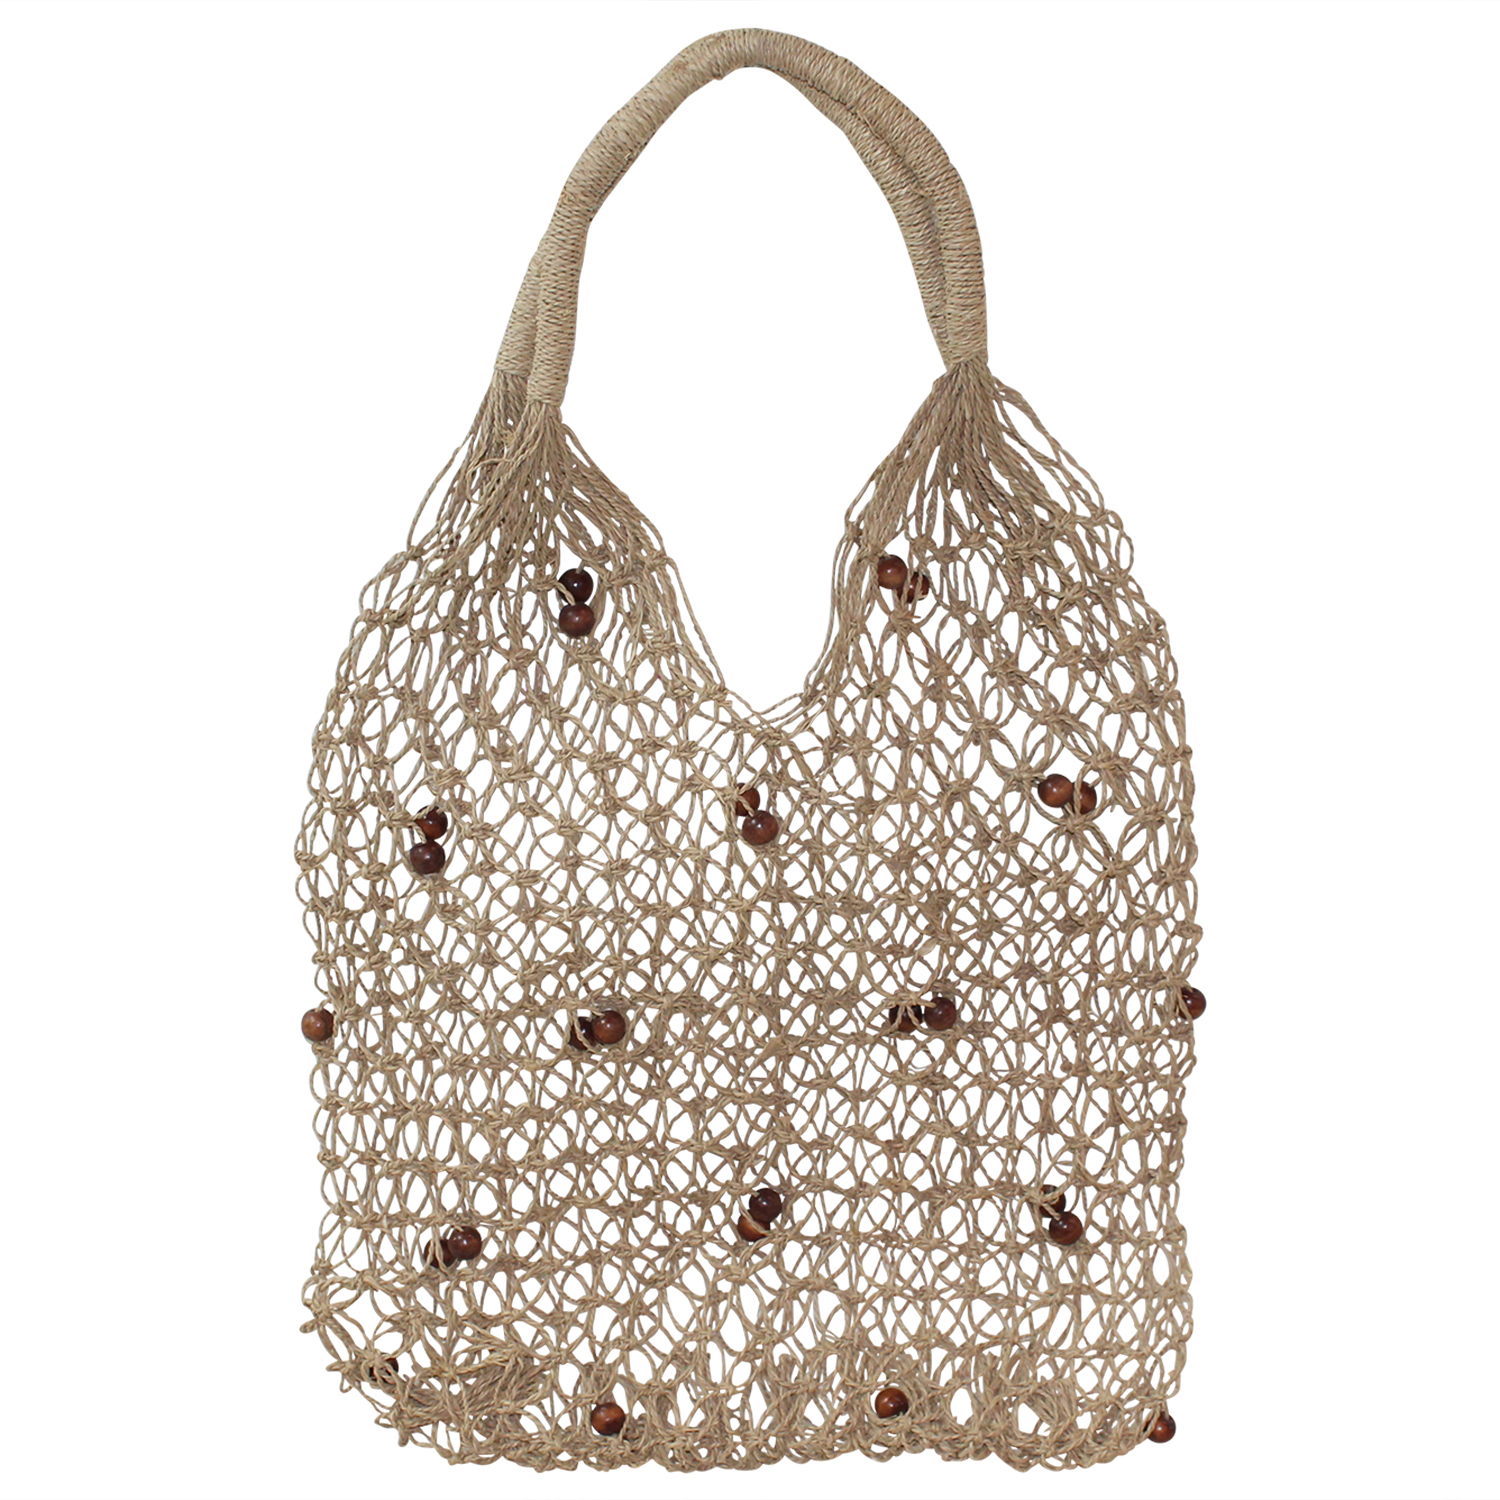 1pce 65cm Carry Tote Shopping Bag Brown Beads Natural Seagrass Woven ...